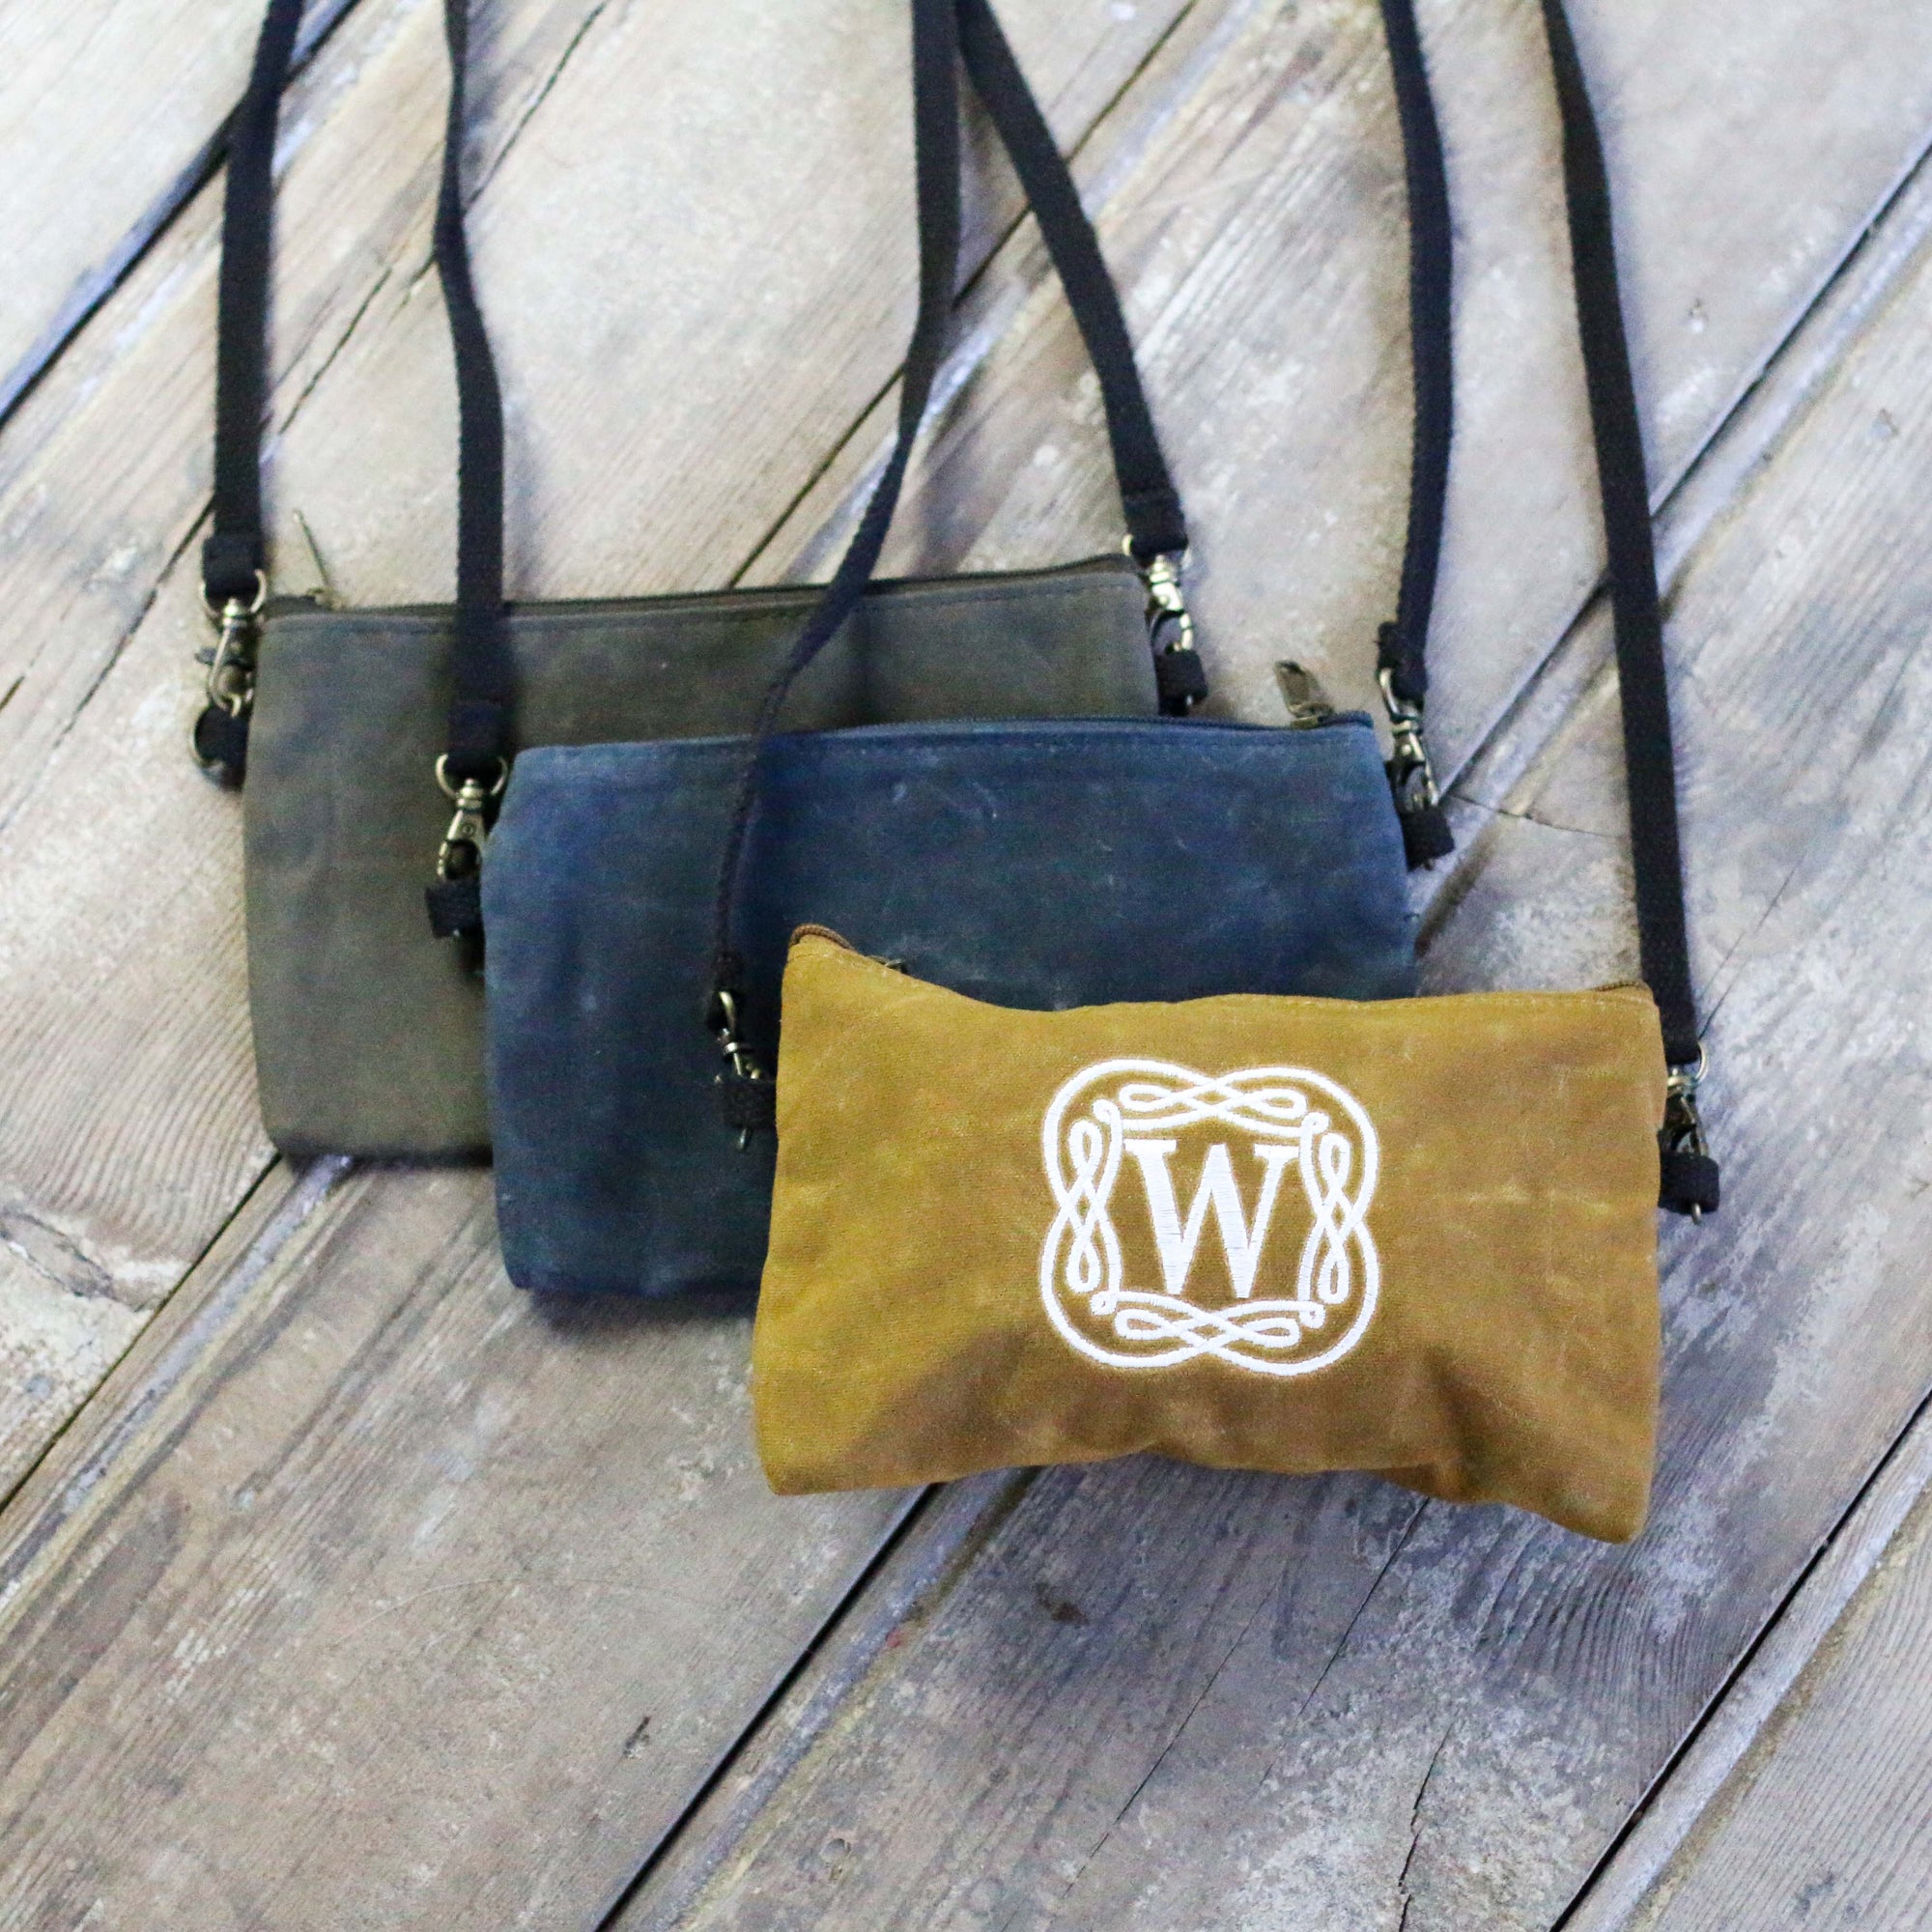 Waxed canvas crossbody clutch with customized initials being worn by a person